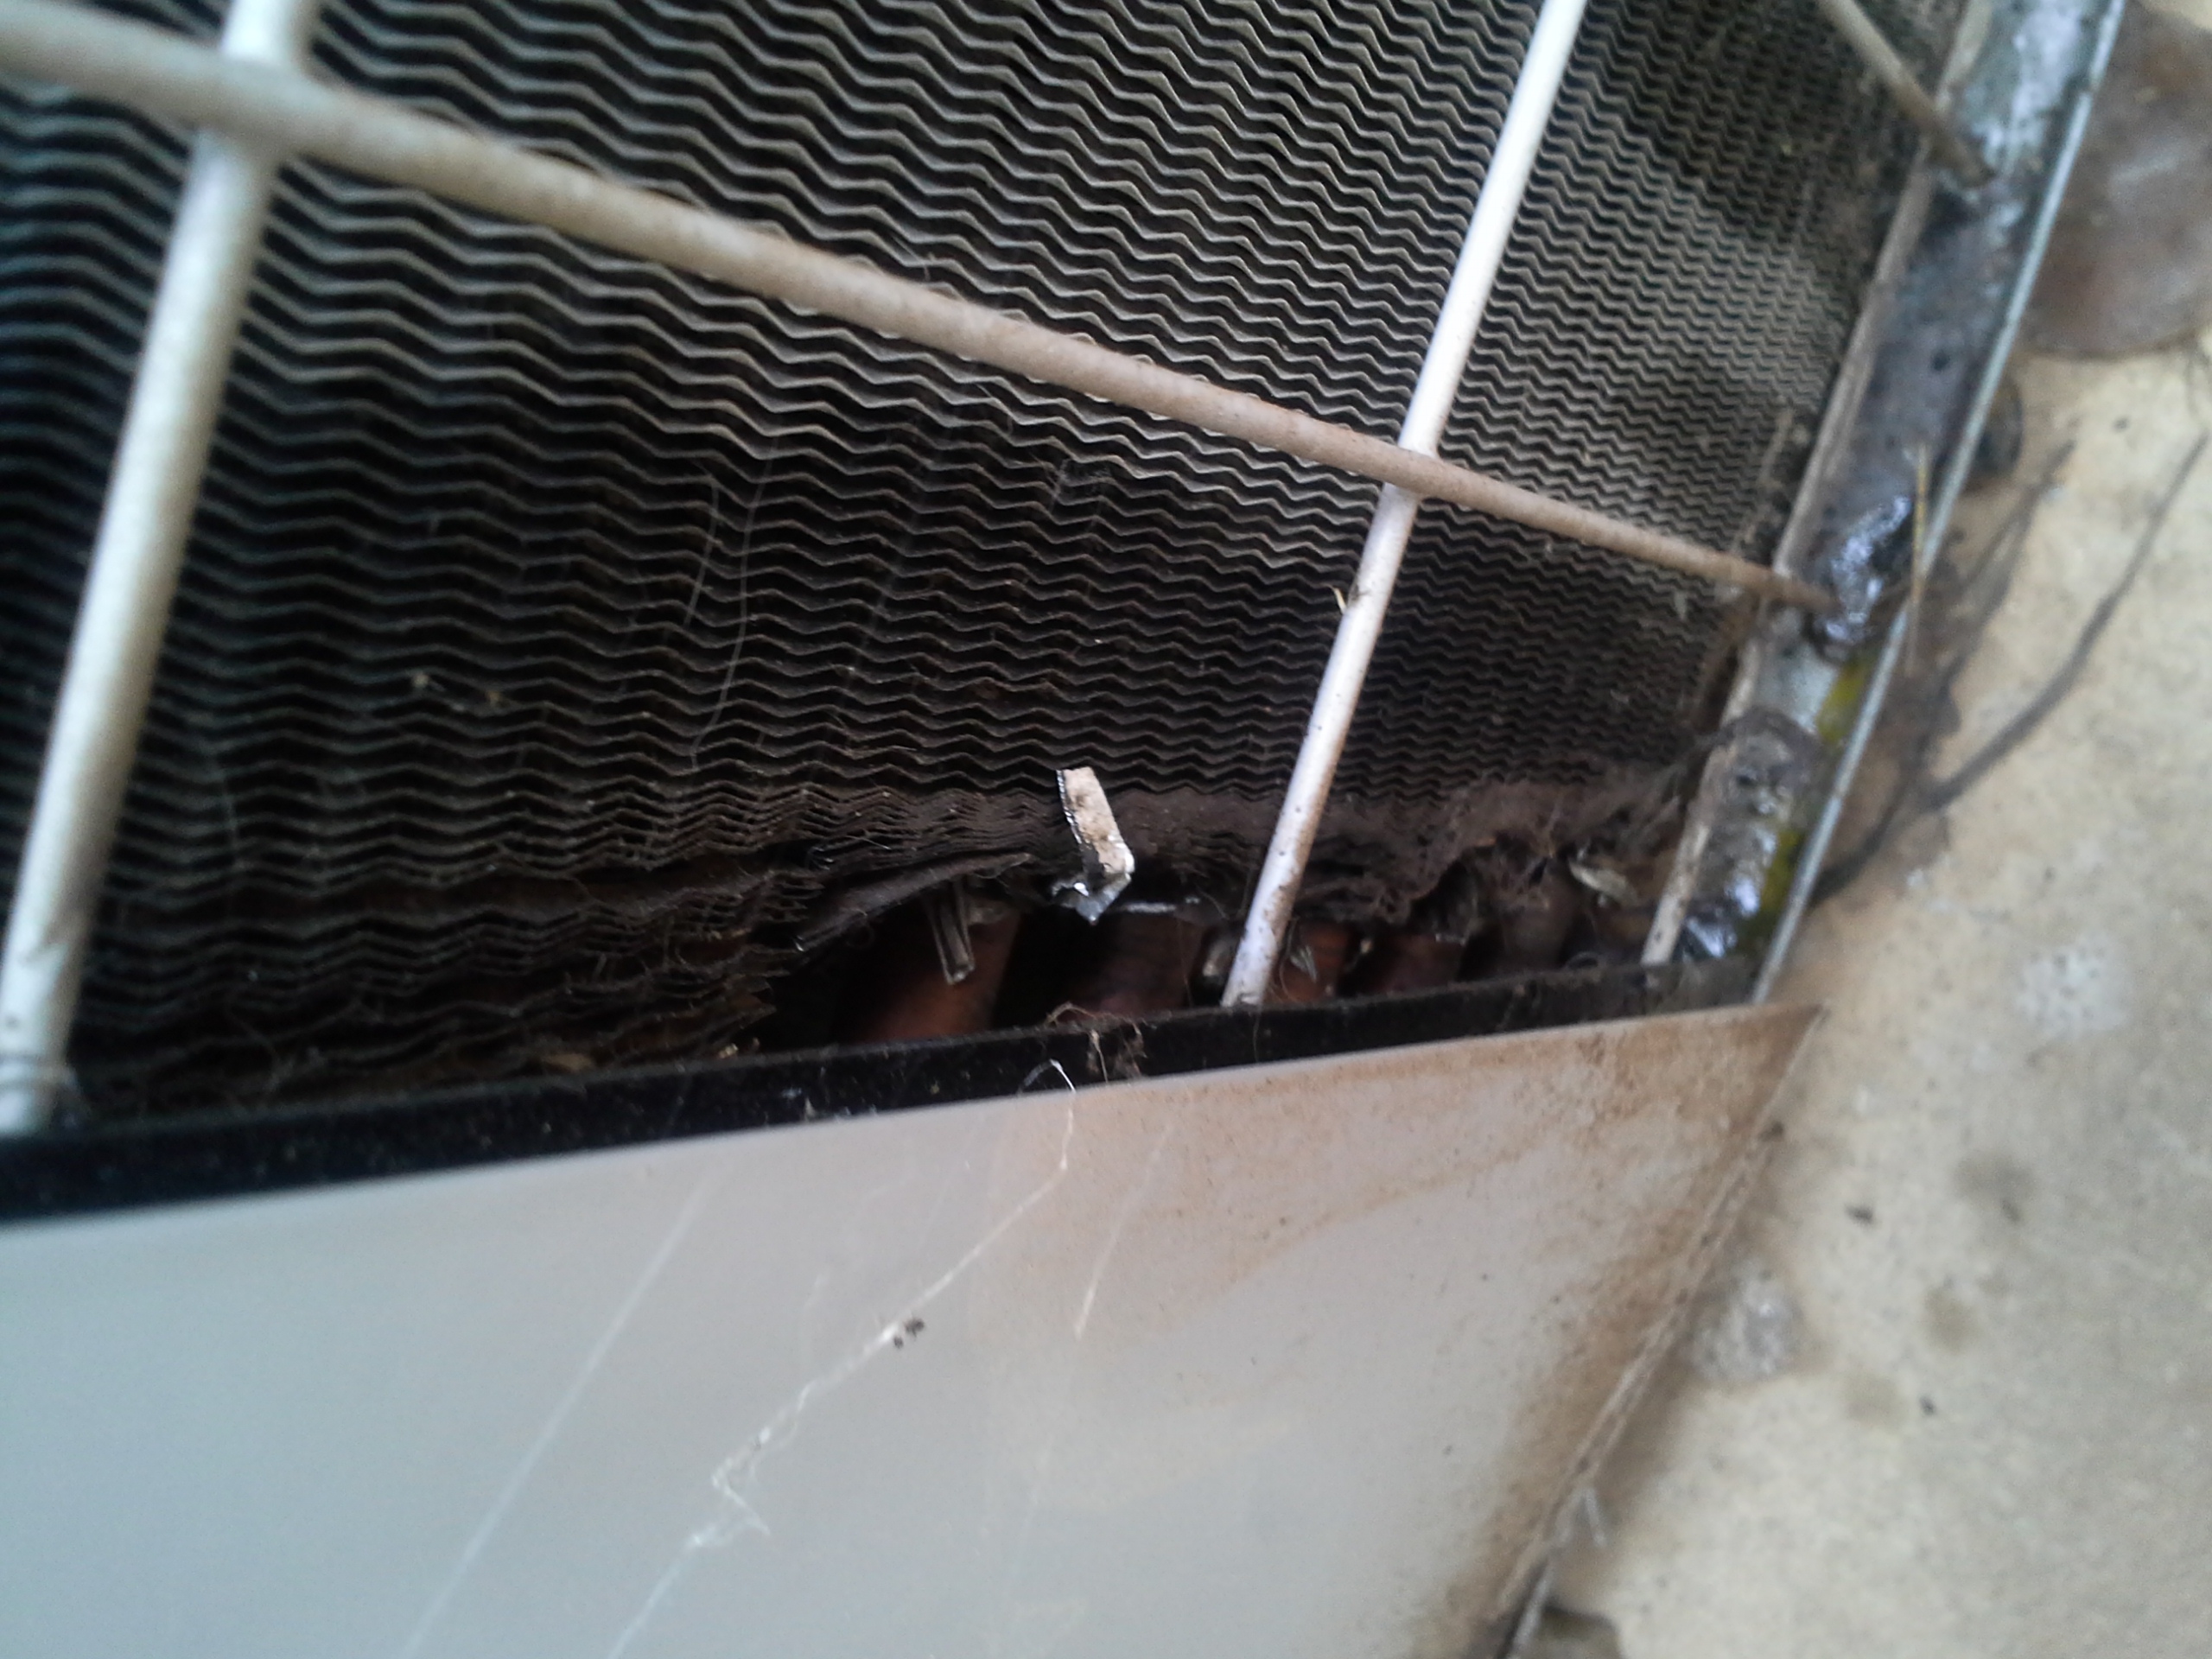 Damage to air conditioning unit with leak. 